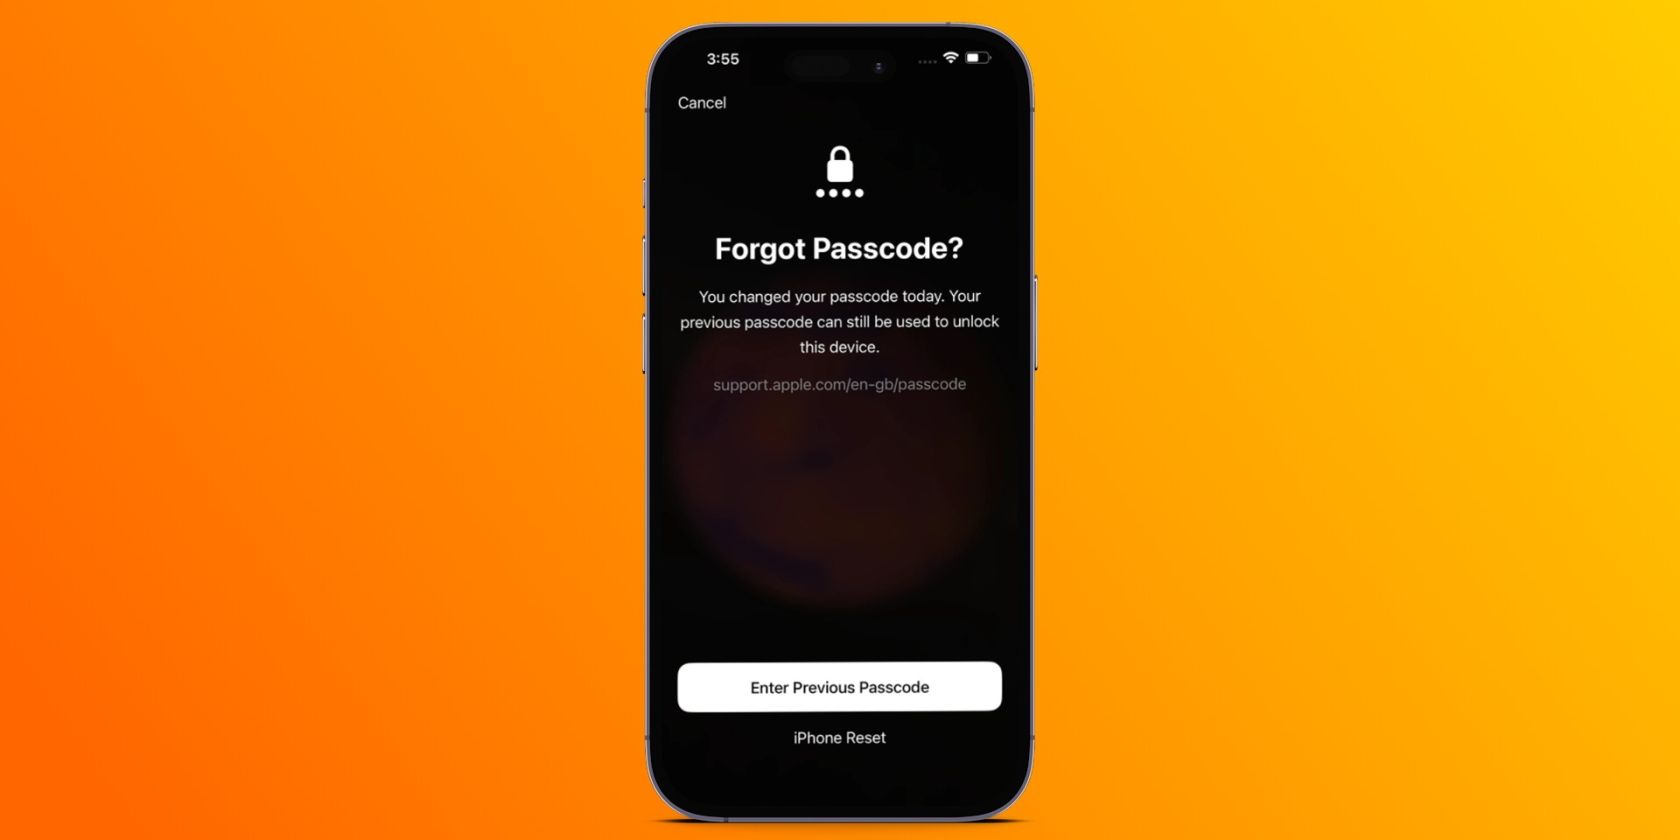 how to, how to reset your iphone passcode with its old passcode